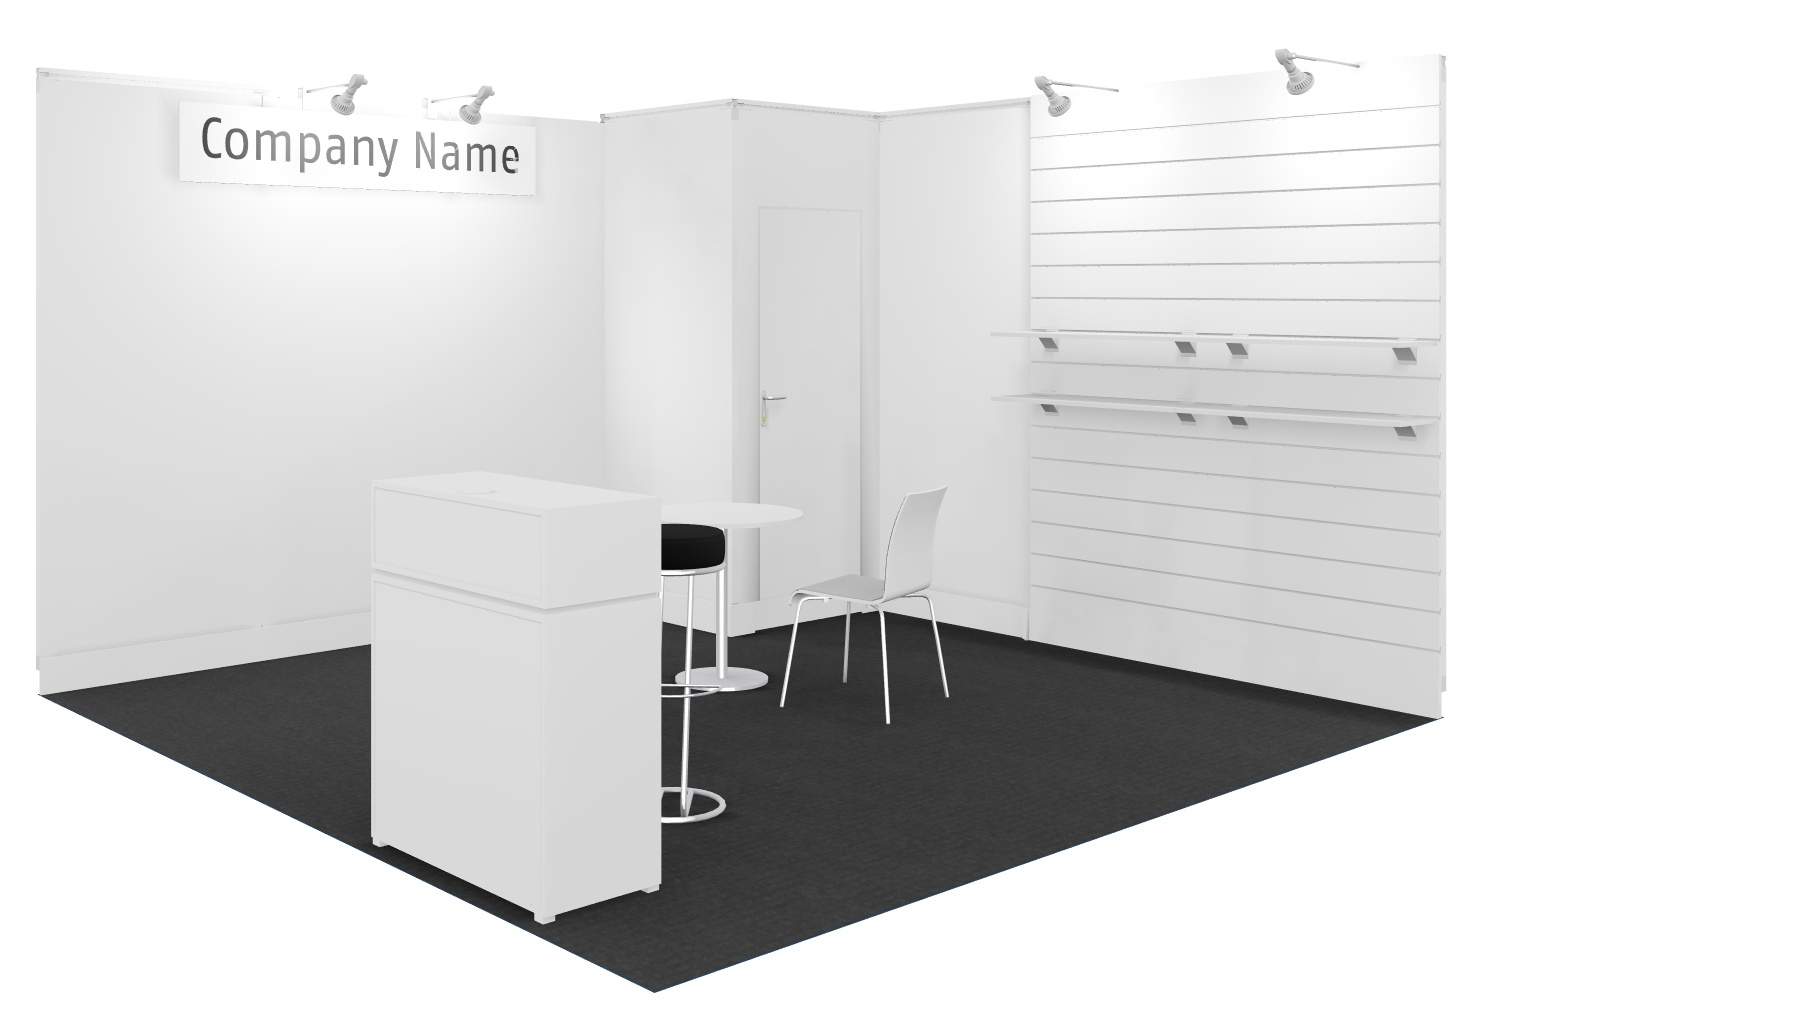 Complete stand 16 m²